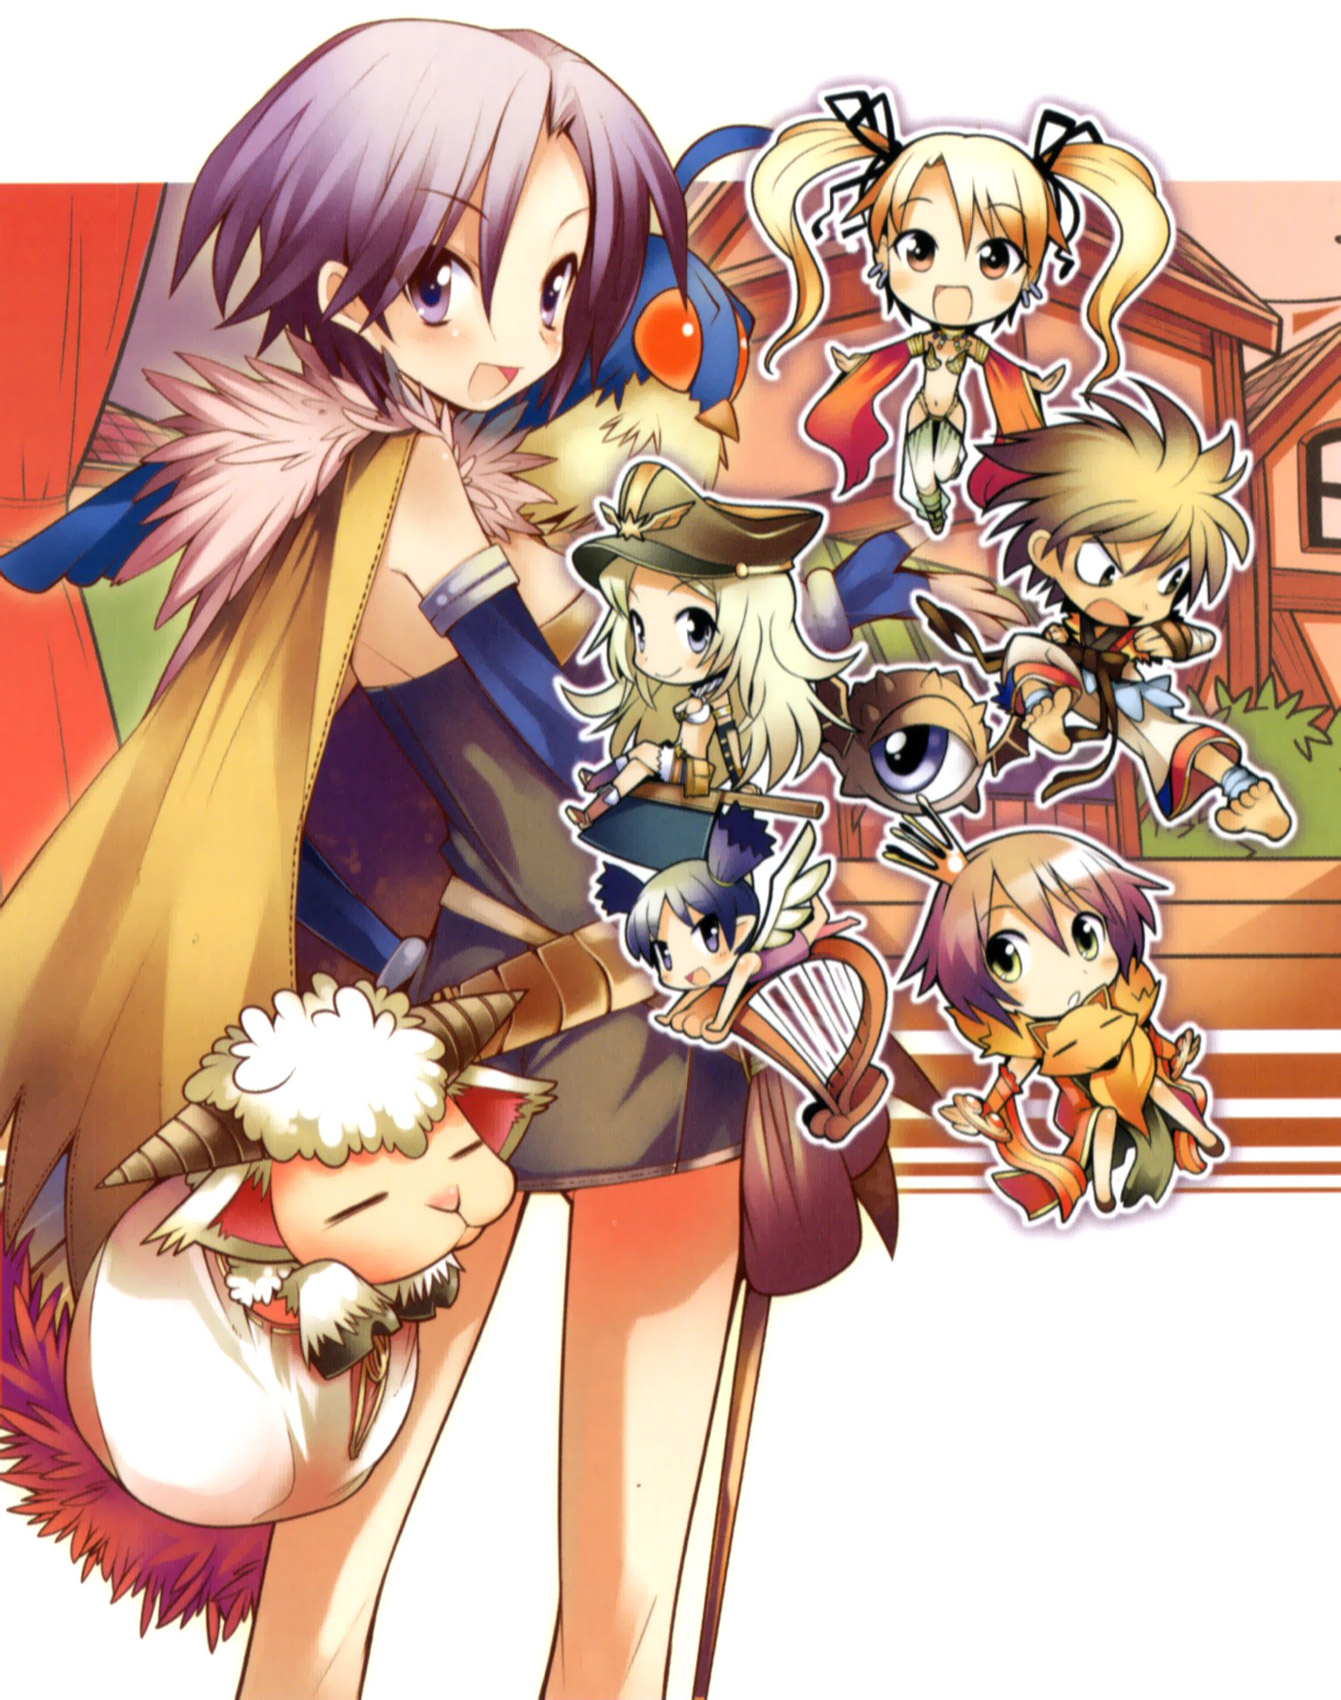 Ragnarok Online 5th anniversary memorial book image by Various Artists